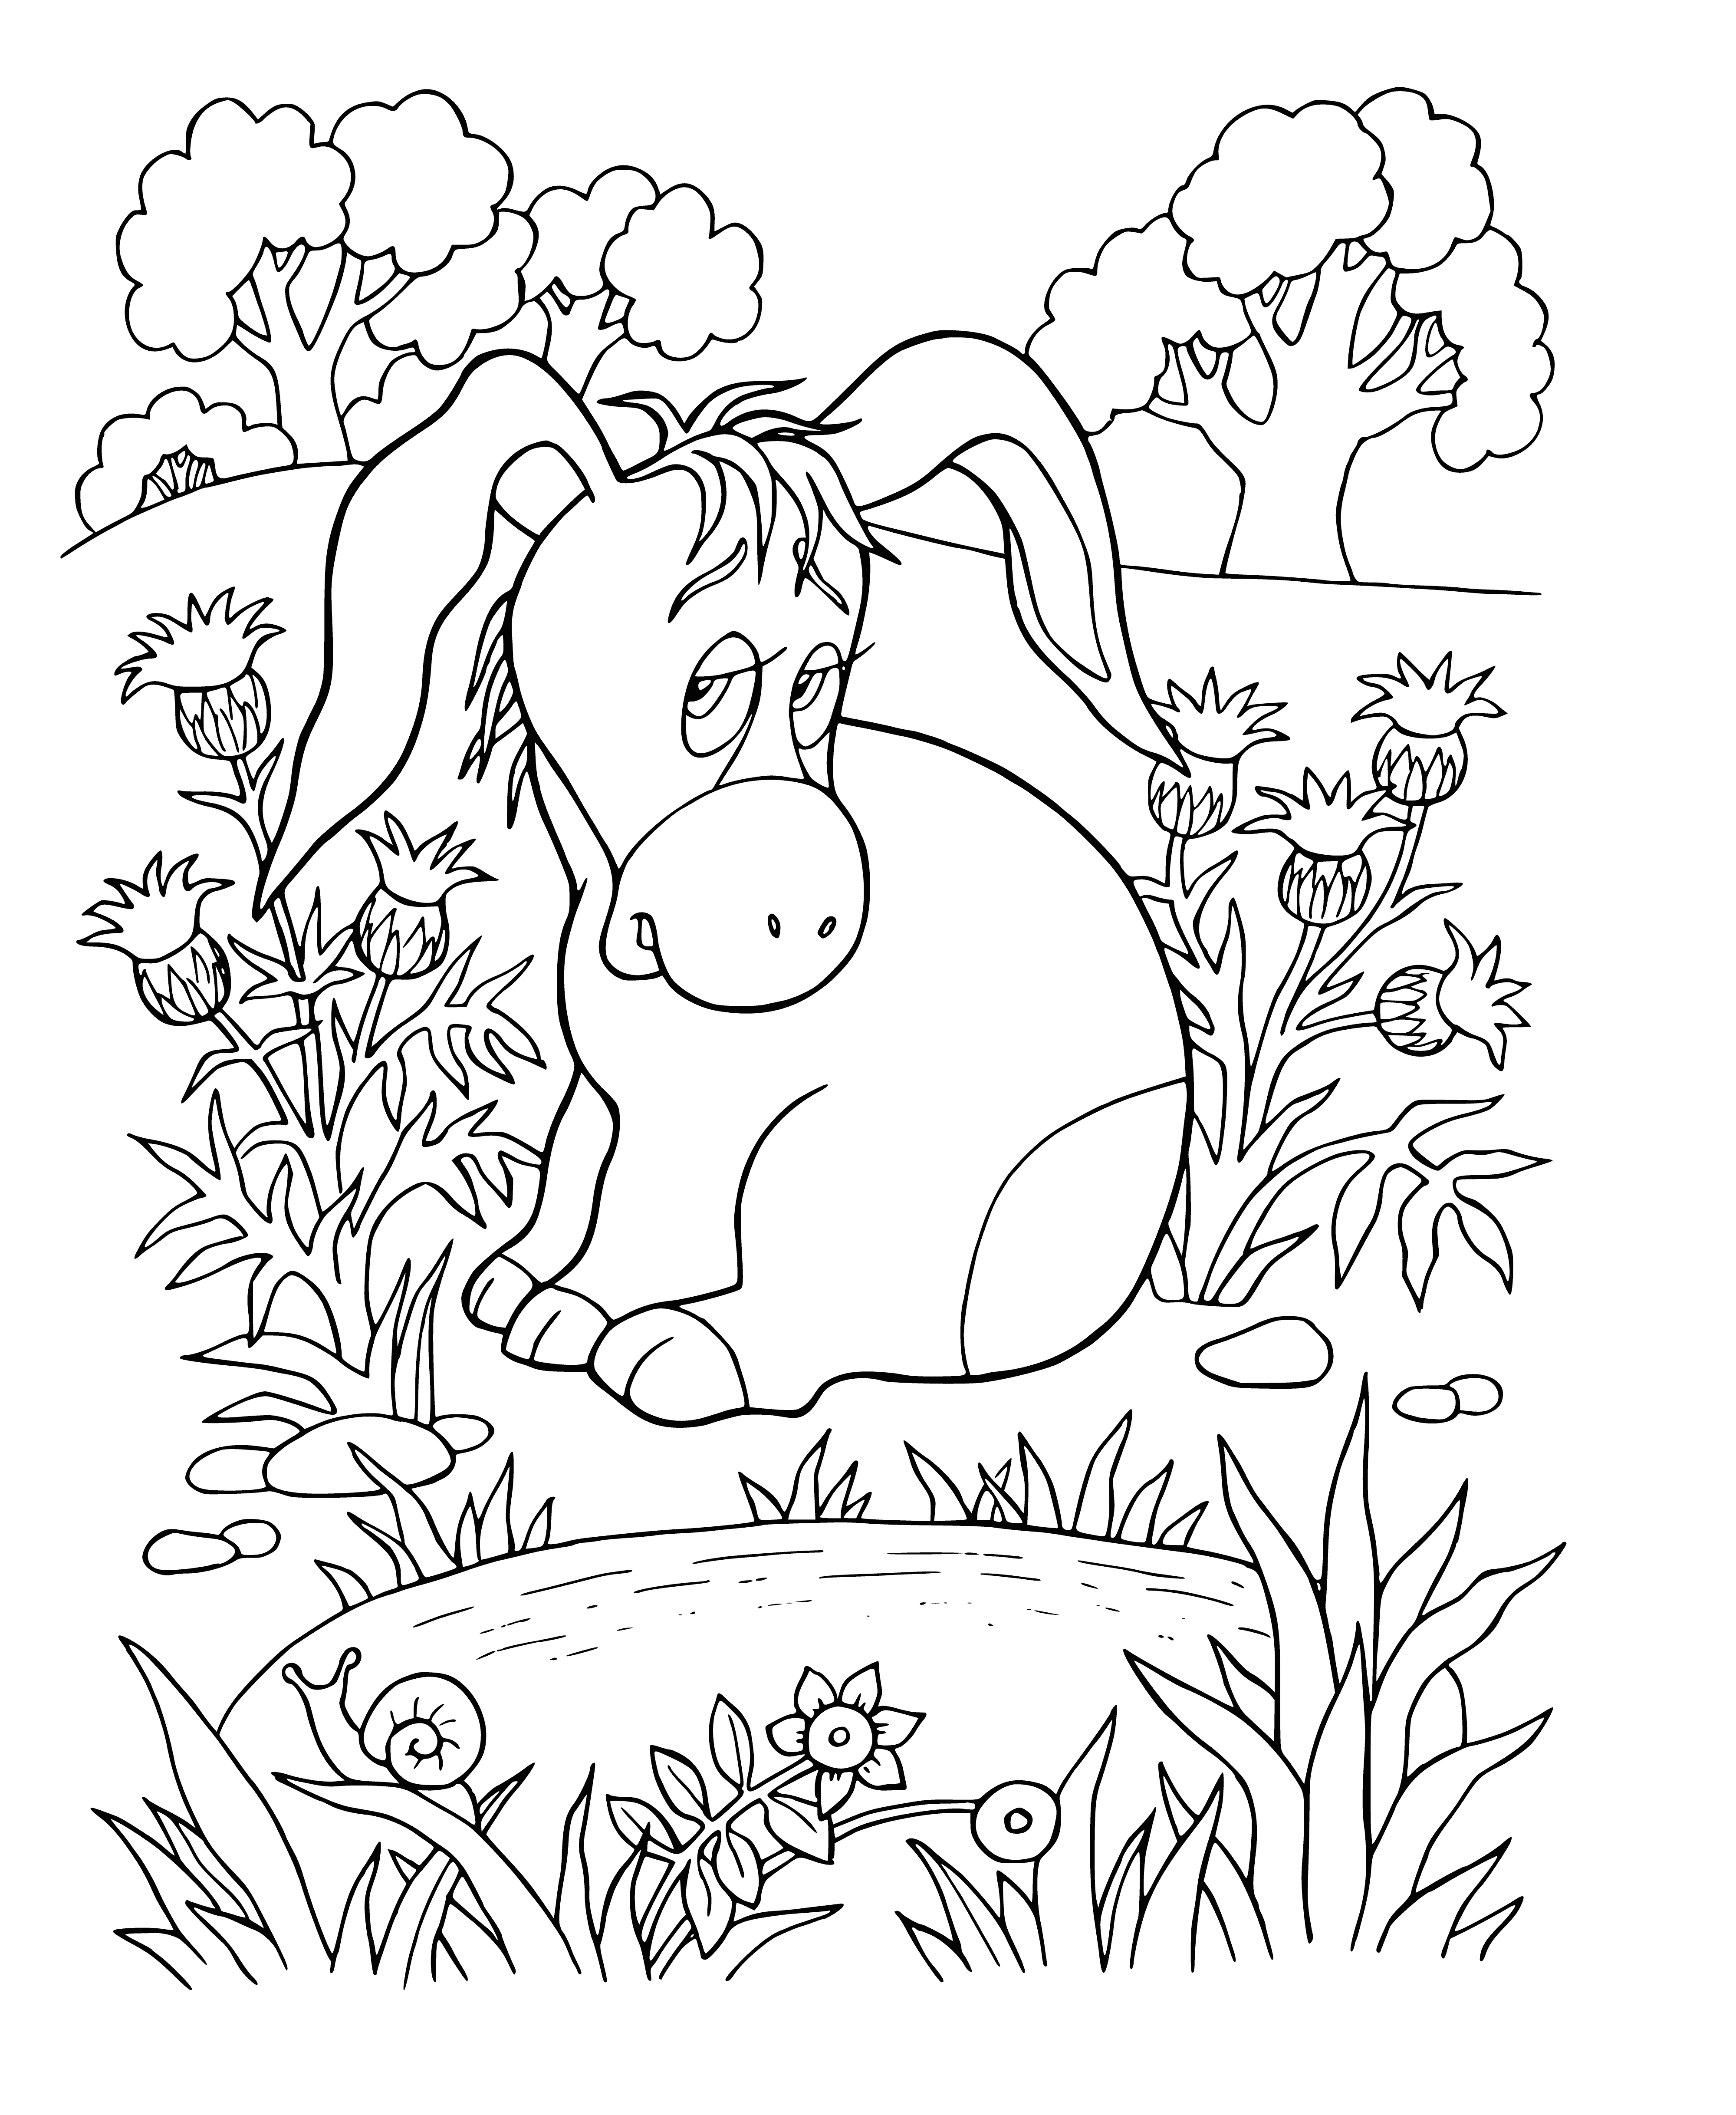 coloring page: Sad donkey stands by a tree with grey body and black mane. Leaves around and eyes downcast, about to cry. #sadness